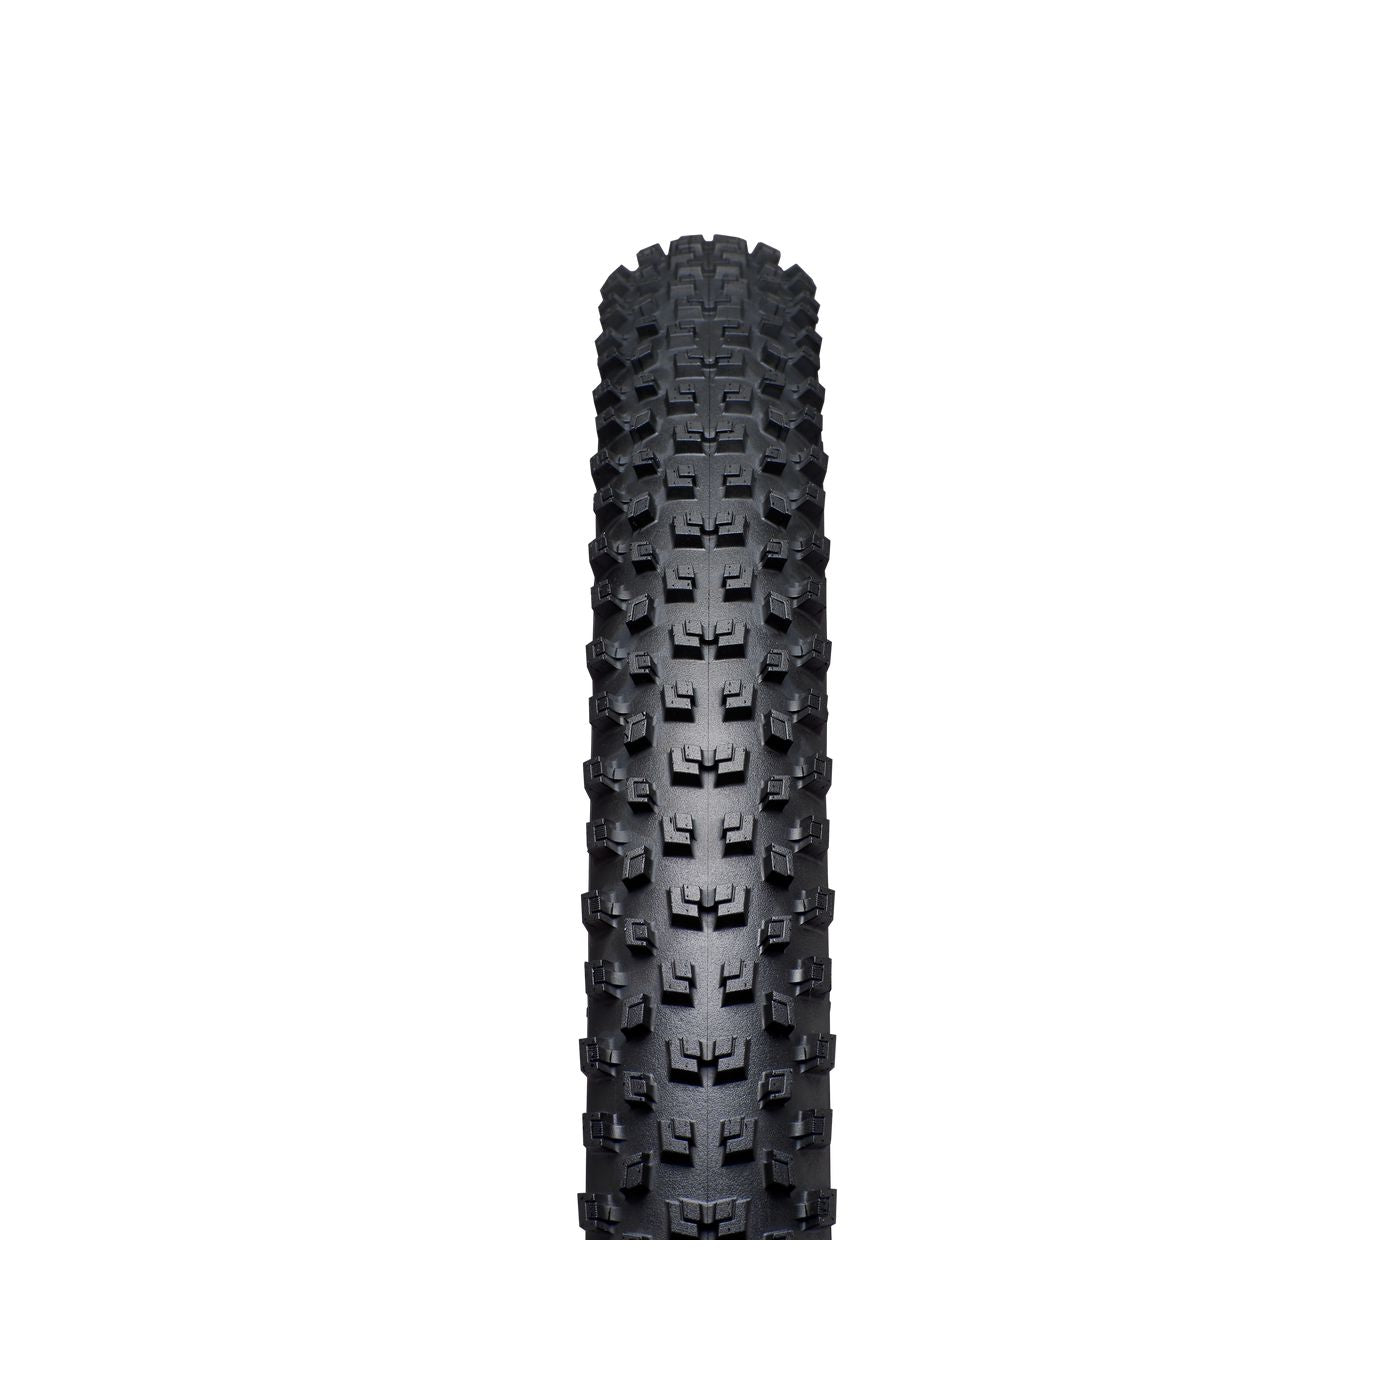 Specialized S-Works Ground Control 2Bliss Ready T5/T7 29" Bike Tire - Tires - Bicycle Warehouse